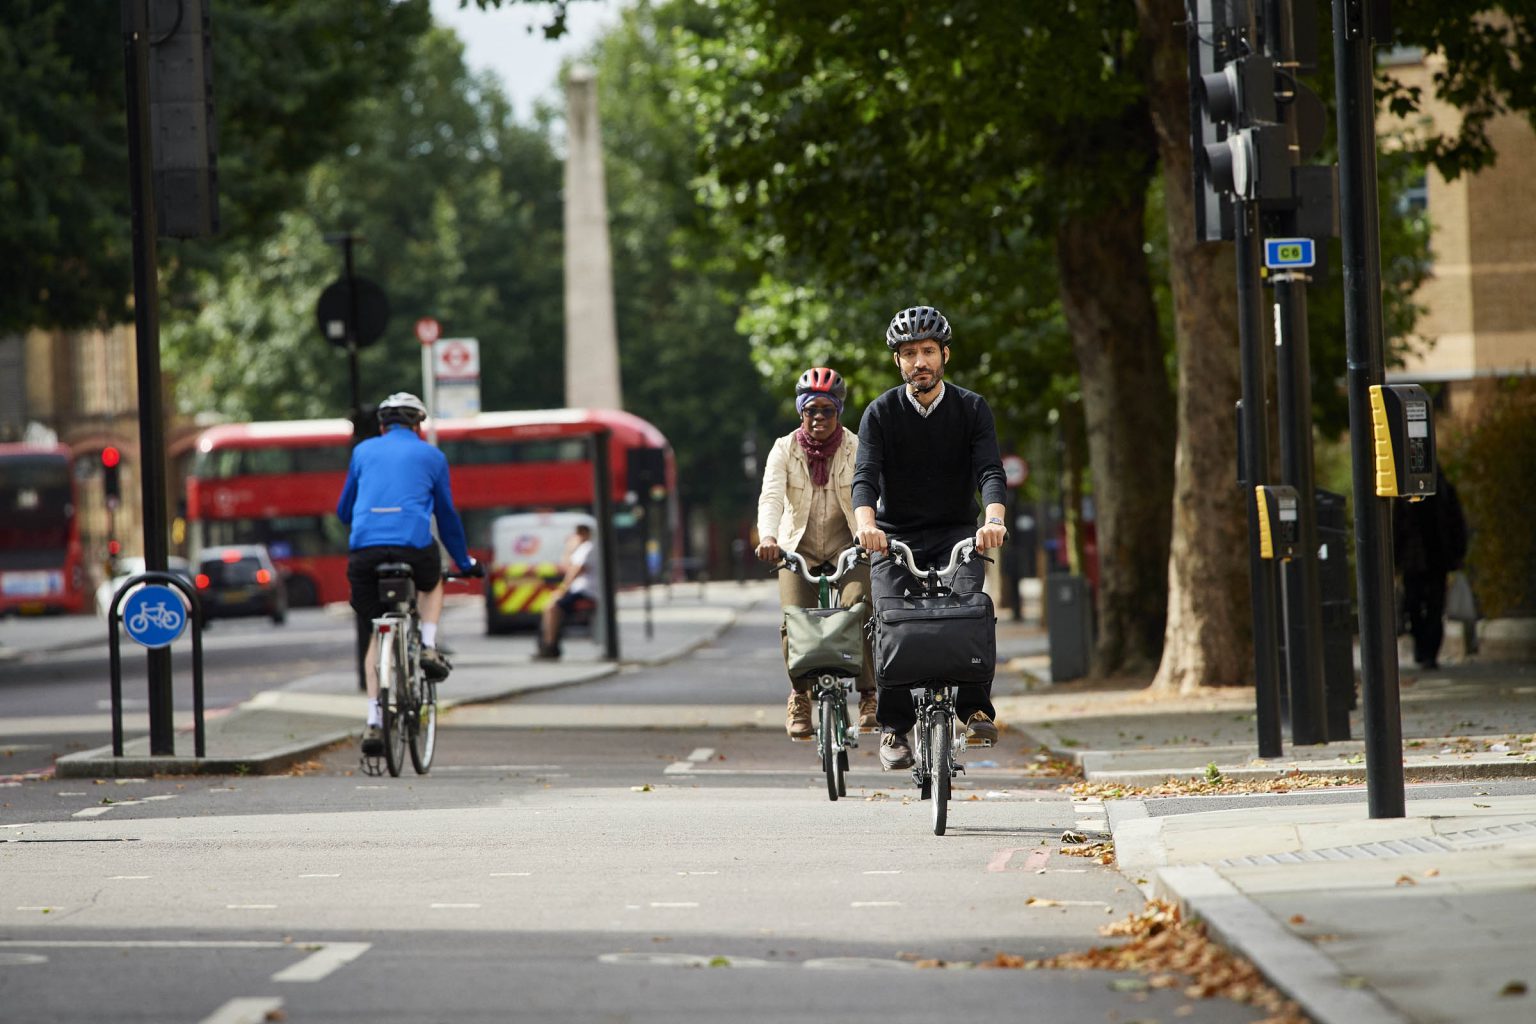 Brompton: Top 3 reasons why we should all cycle more - Halfords